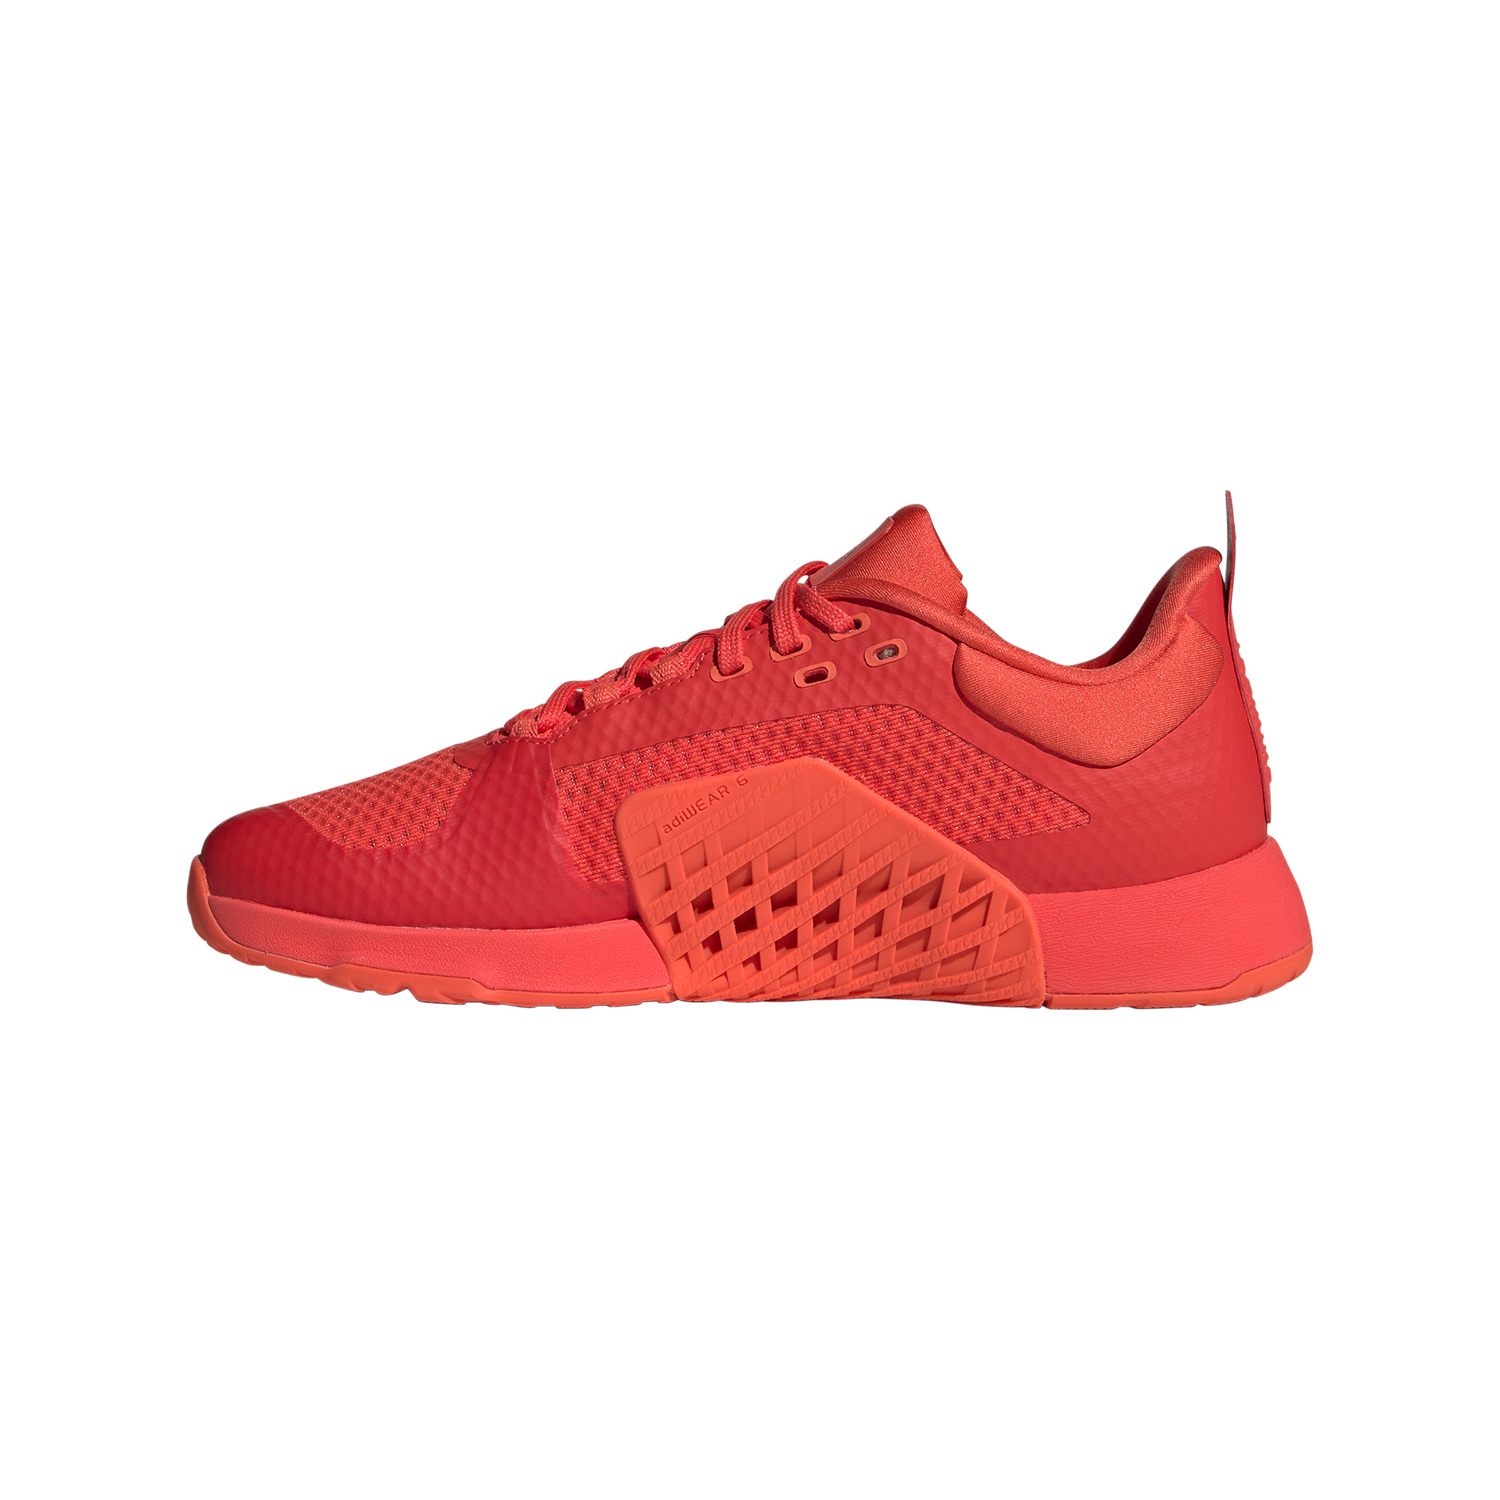 adidas Dropset 2 Trainer - Bright Red/Solar Red/Shadow Red